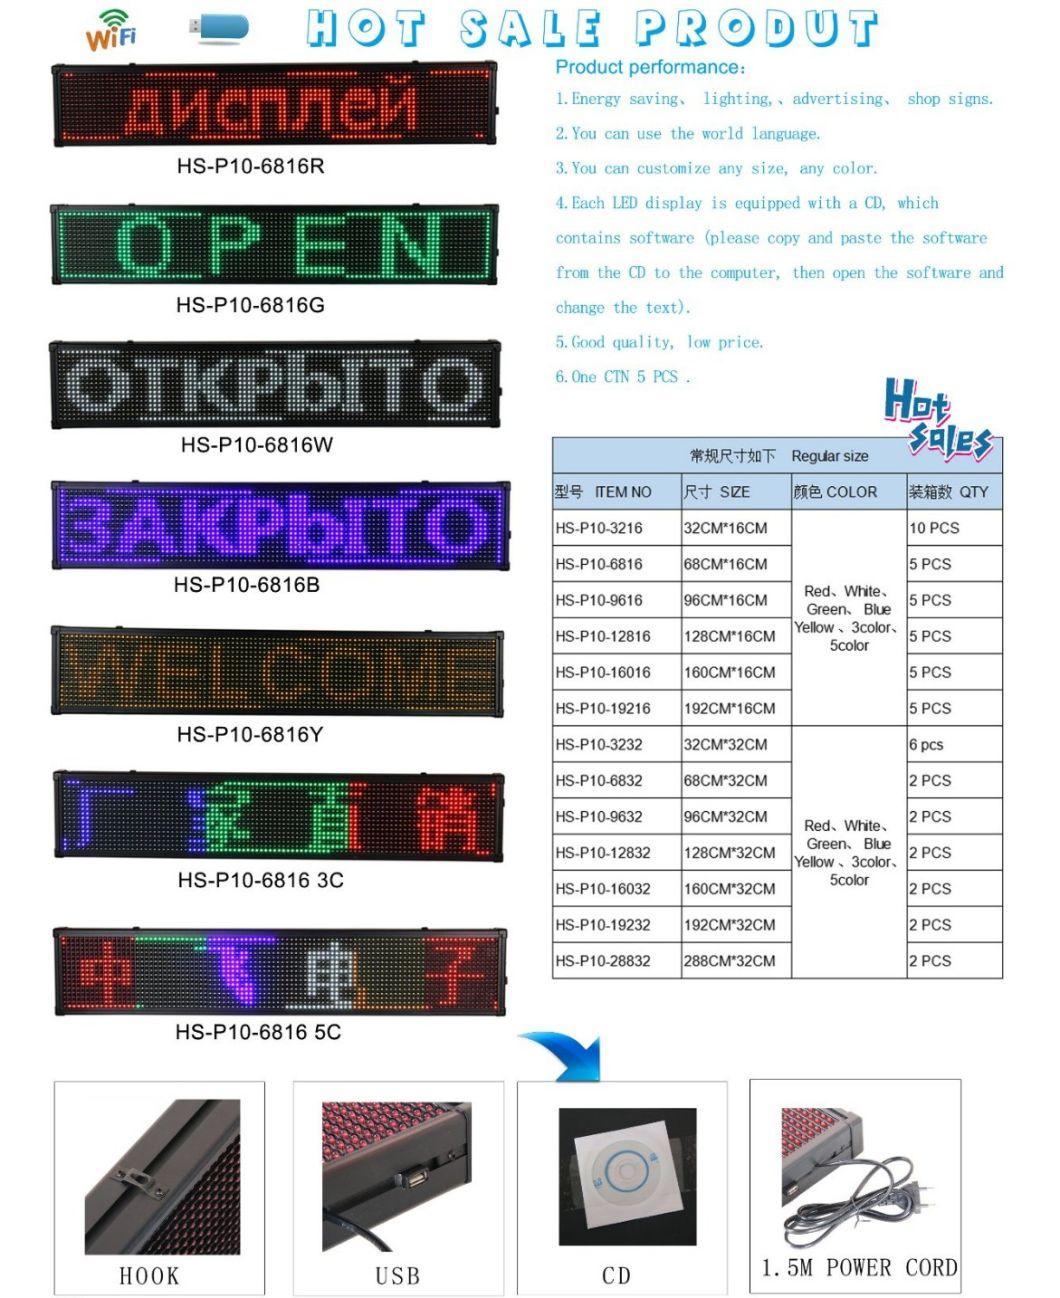 Semi-Outdoor Display Shop to Promote LED Sign Board